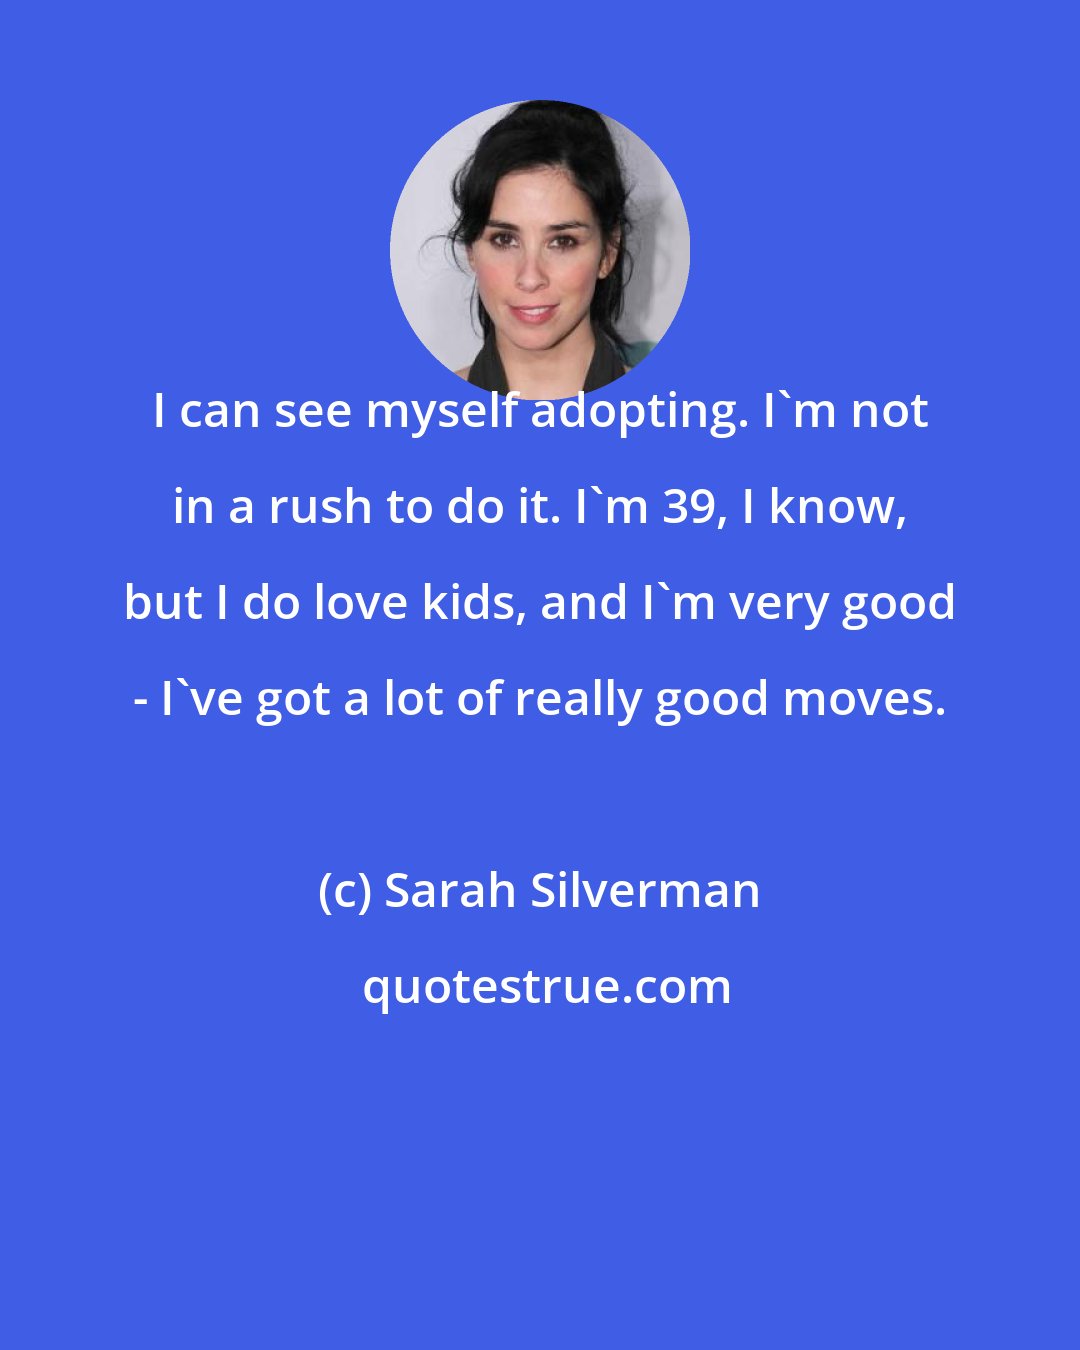 Sarah Silverman: I can see myself adopting. I'm not in a rush to do it. I'm 39, I know, but I do love kids, and I'm very good - I've got a lot of really good moves.